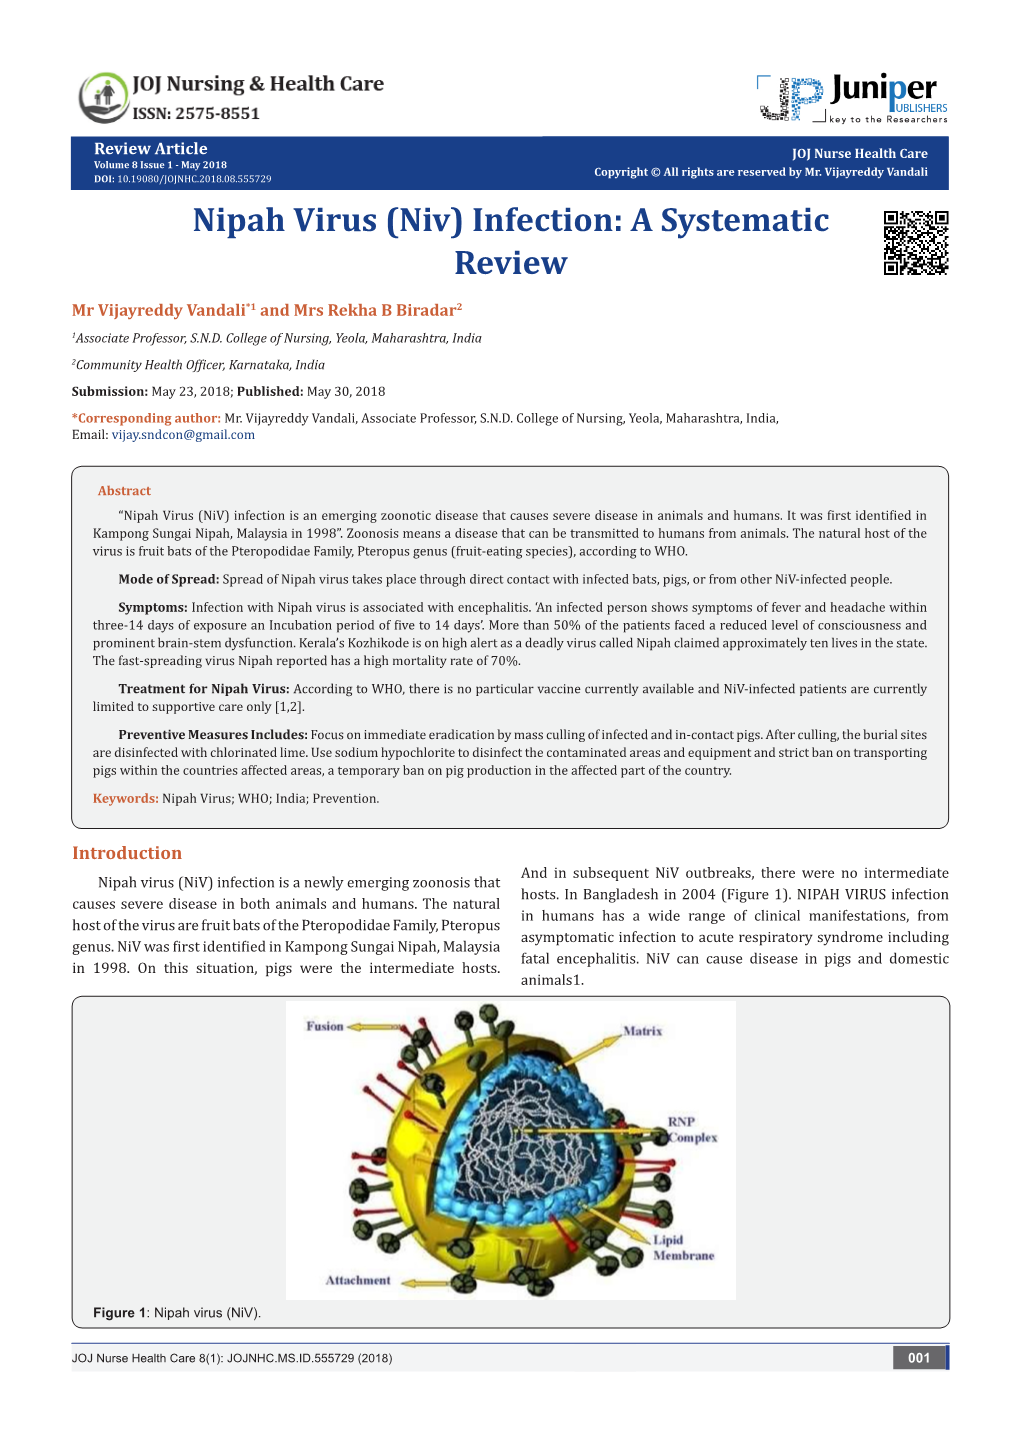 Nipah Virus (Niv) Infection: a Systematic Review